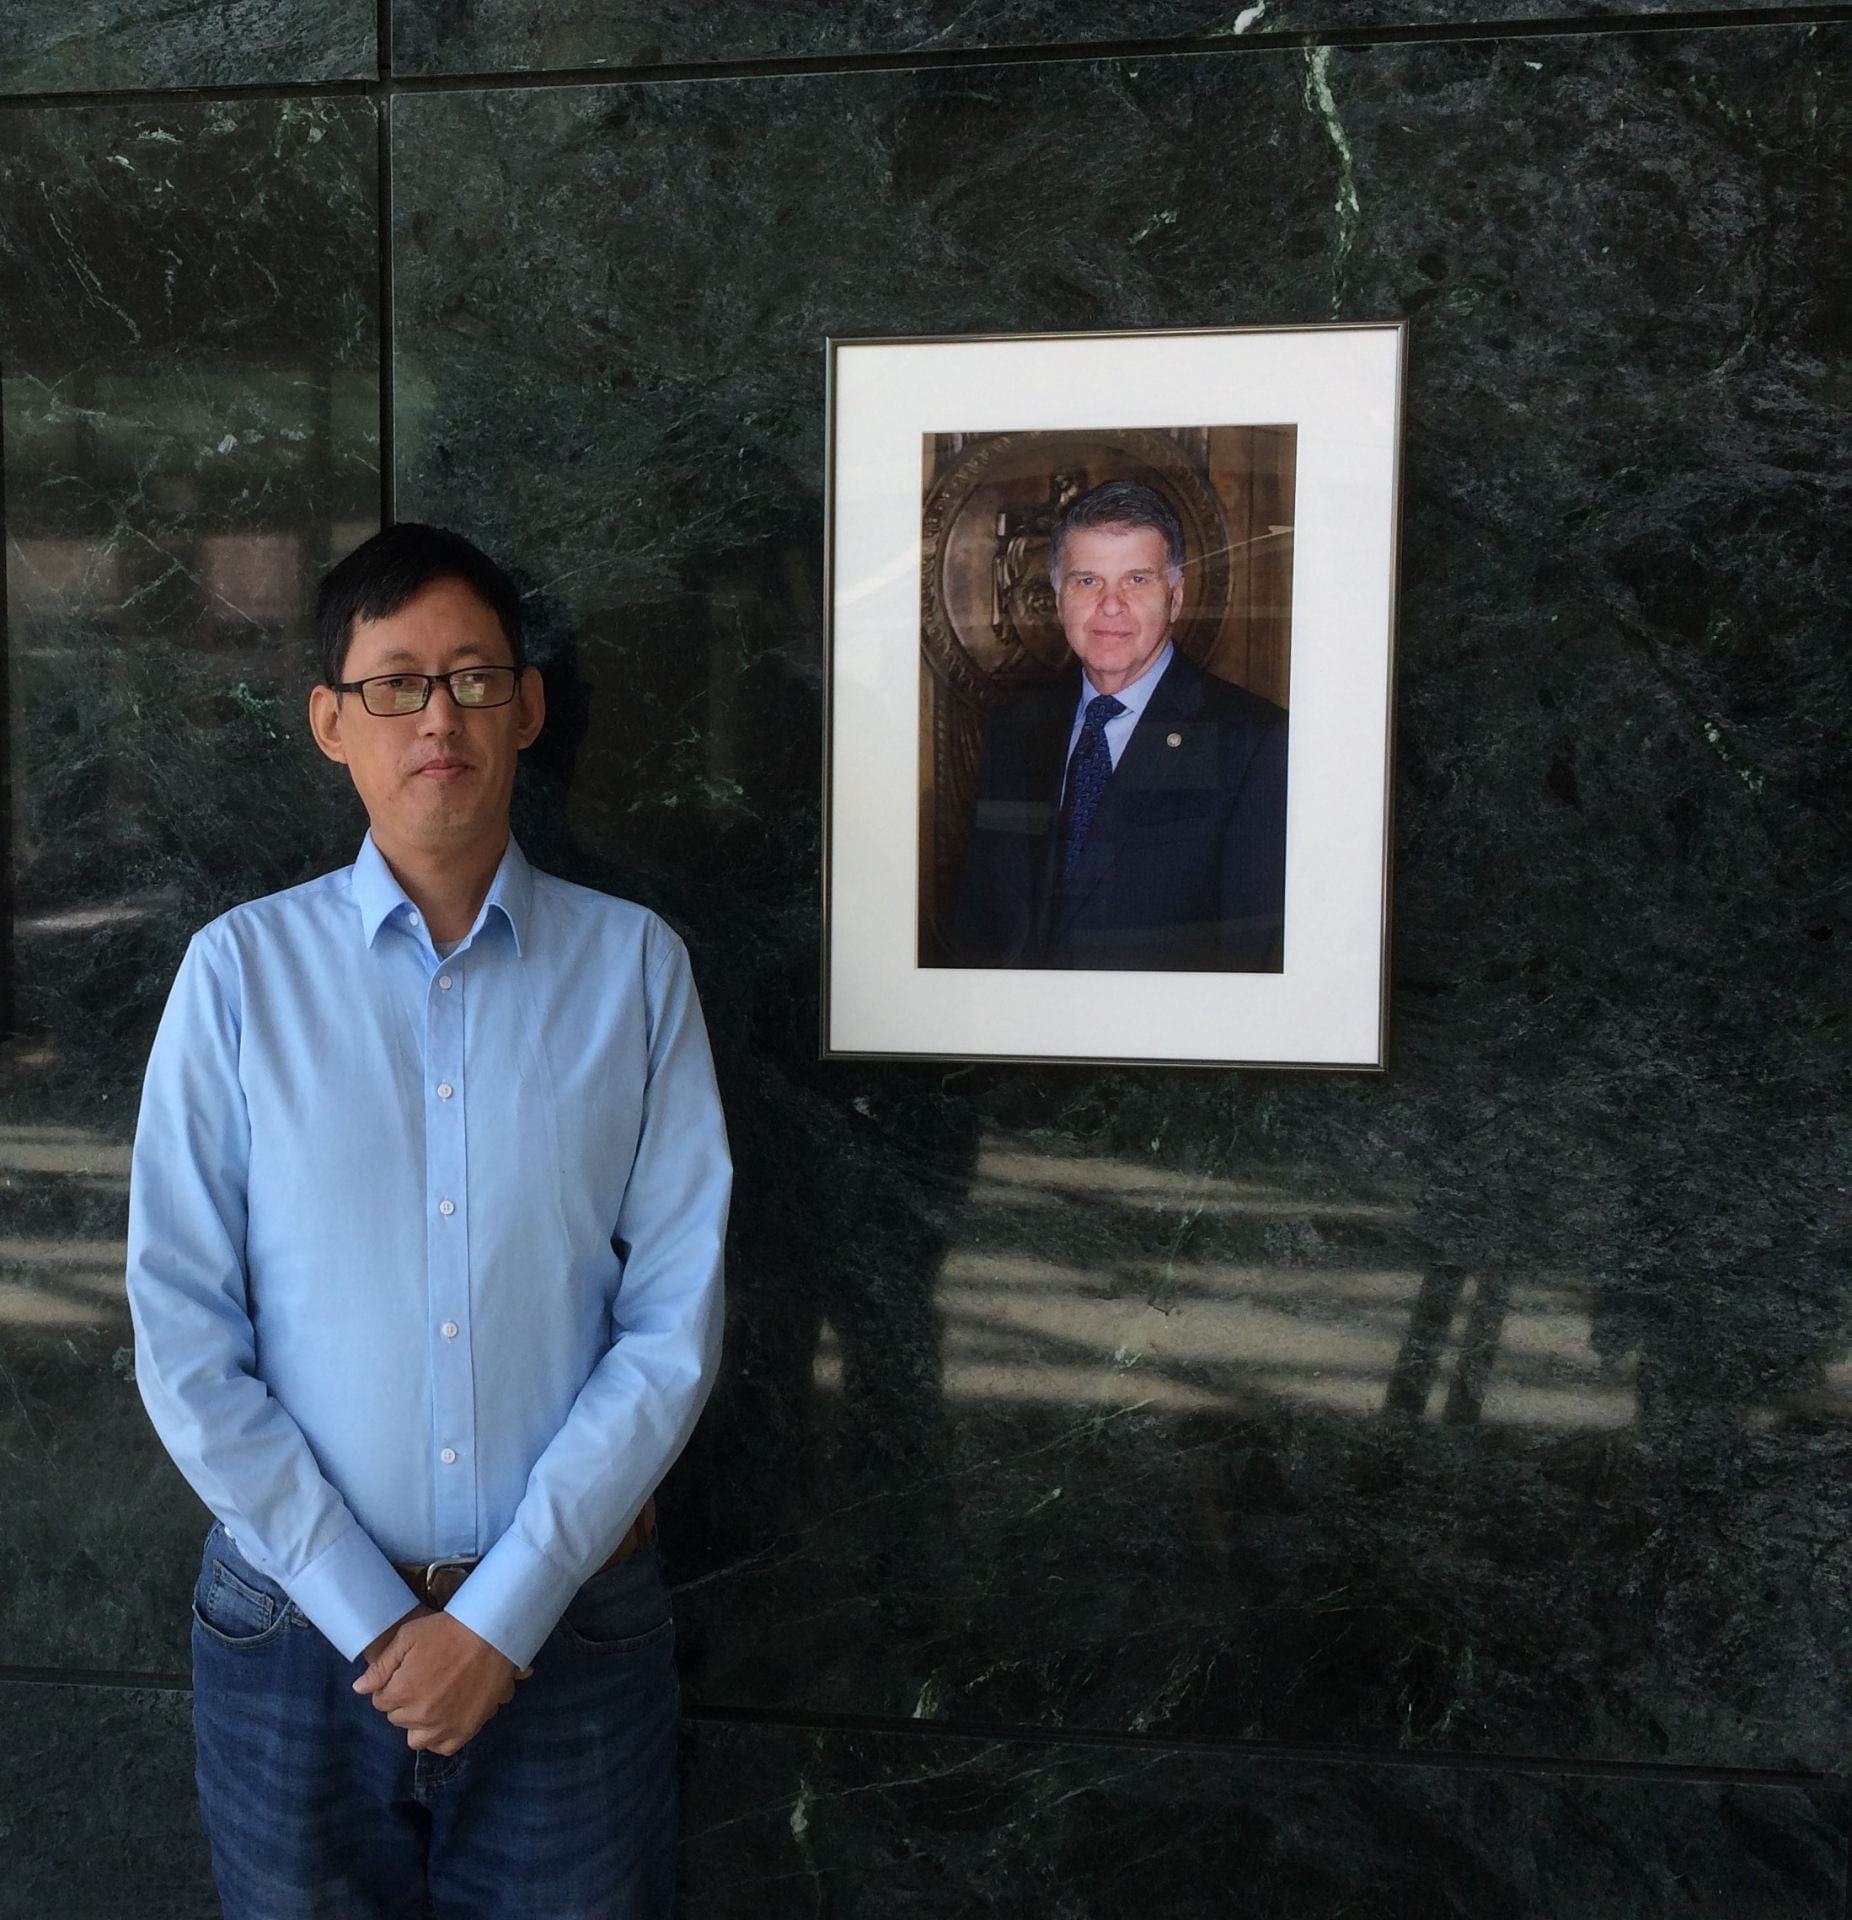 Bo Chen pictured with a photograph in professional attire